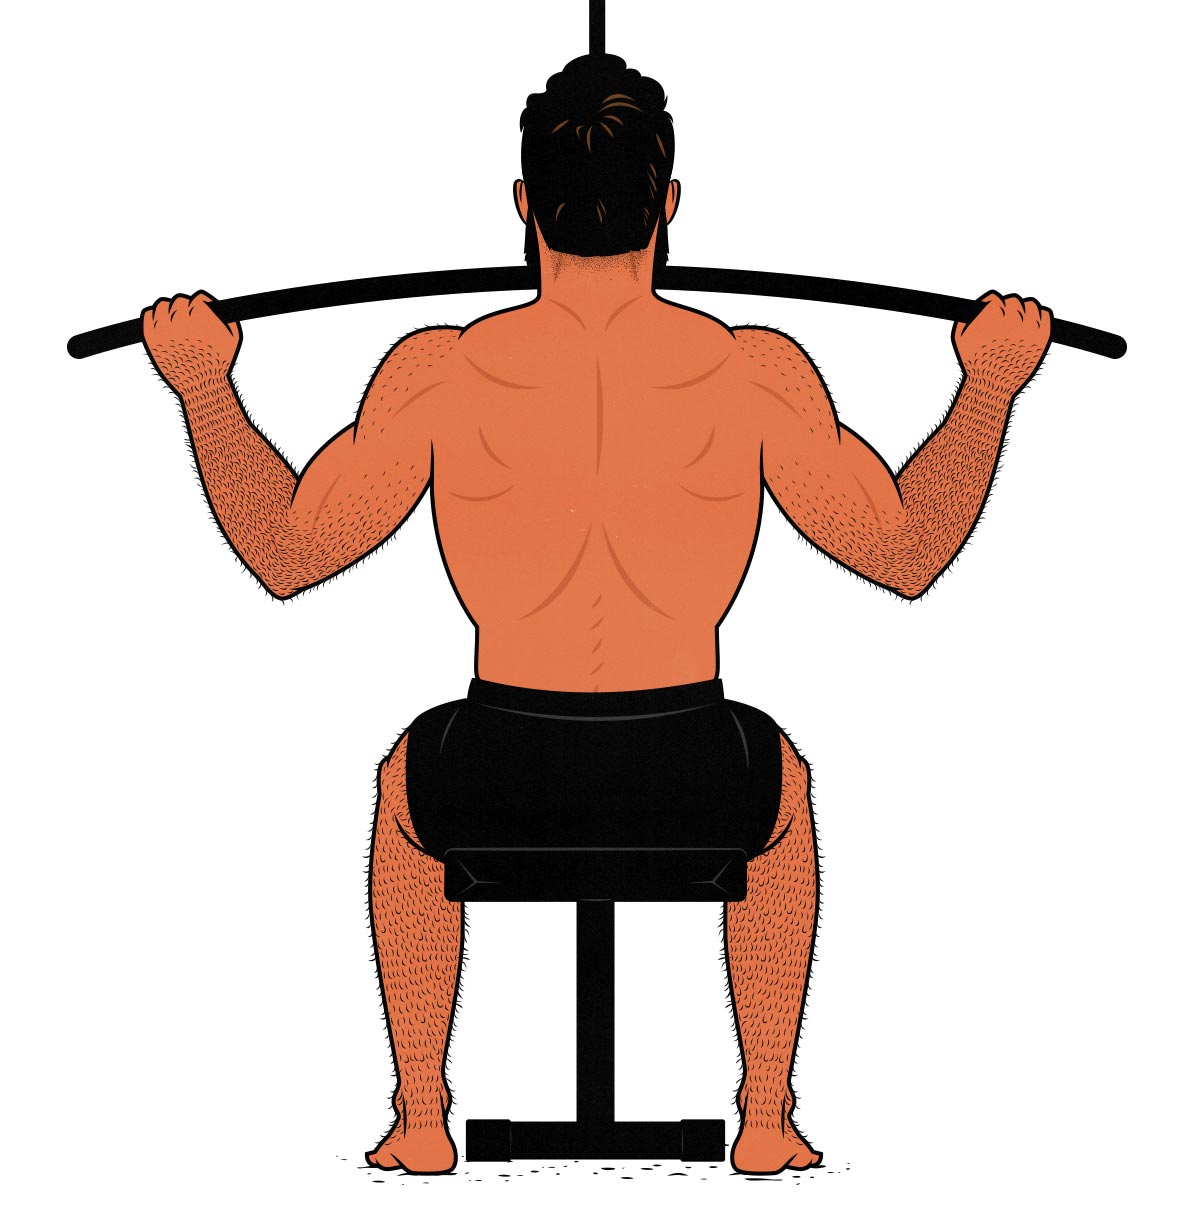 Illustration of a weight lifter doing lat pulldowns on Back Day.